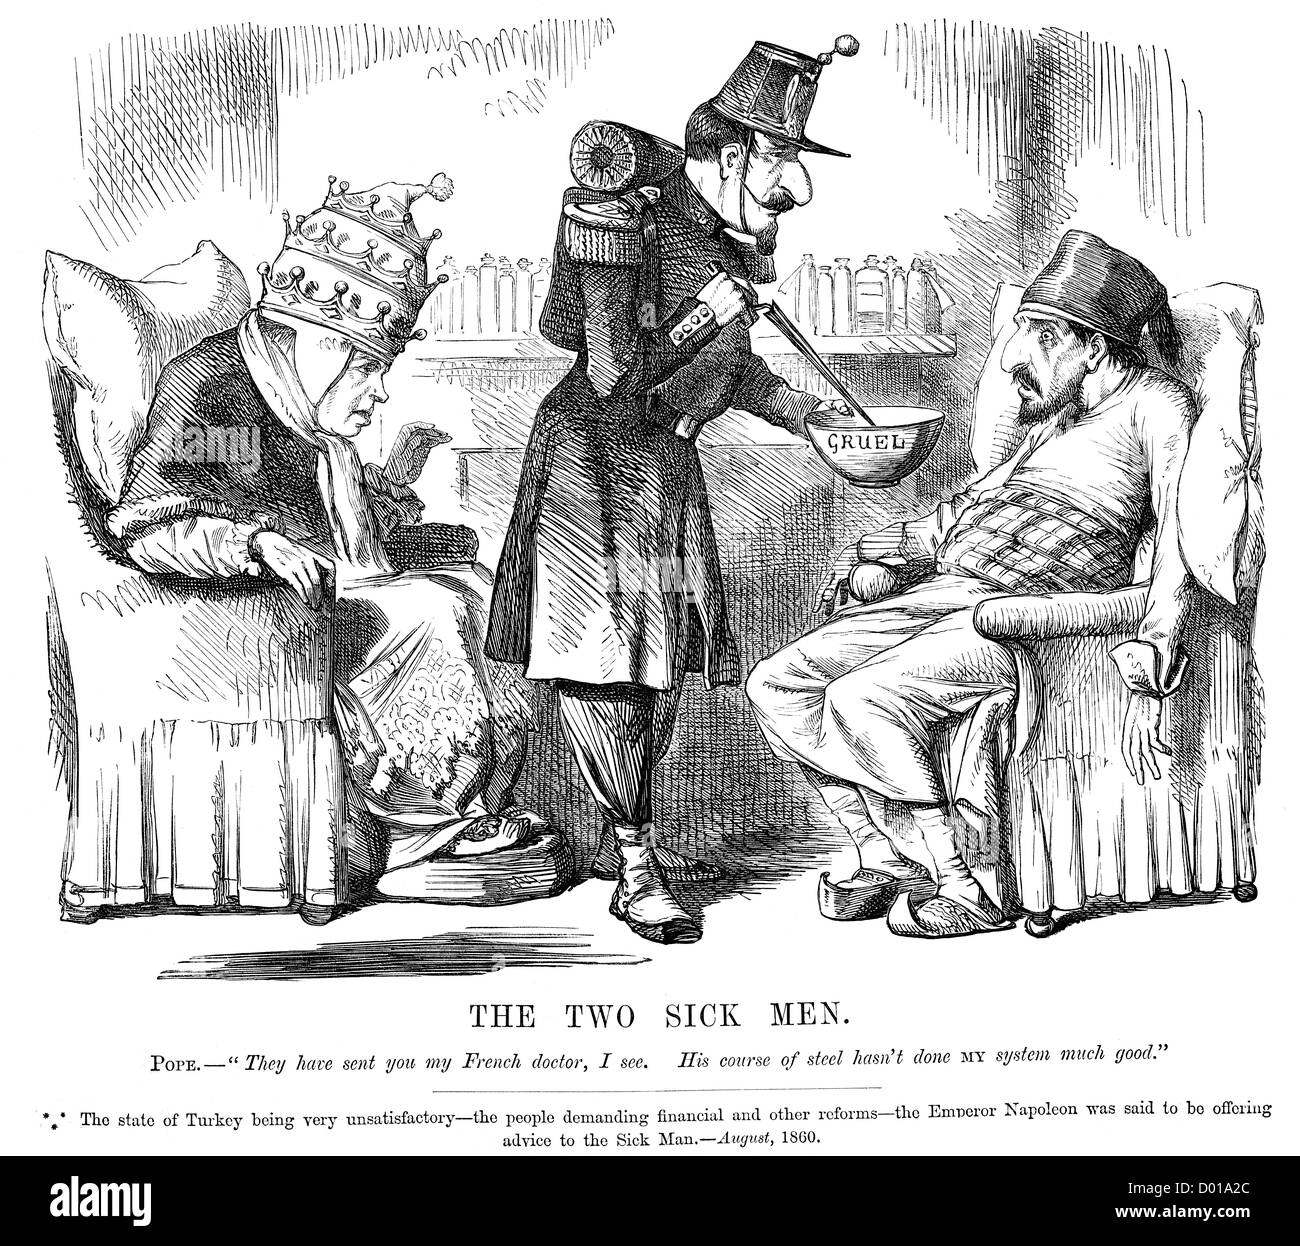 Two Sick Men of Europe. Political cartoon about the Emperor Napoleon helping the Pope and Turkey, August 1860 Stock Photo